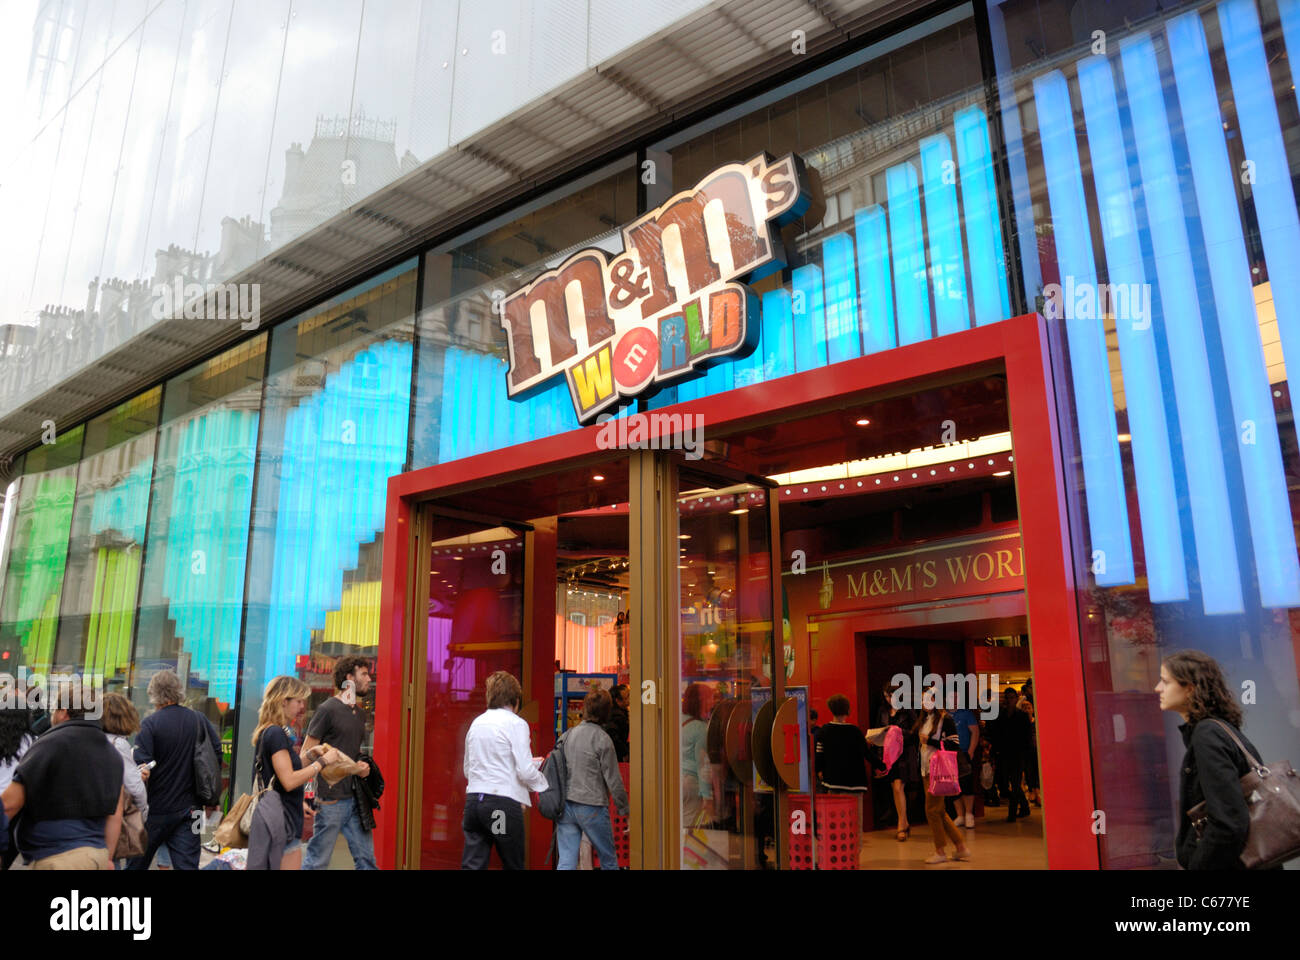 M&M's World store, Leicester Square, London, England Stock Photo - Alamy